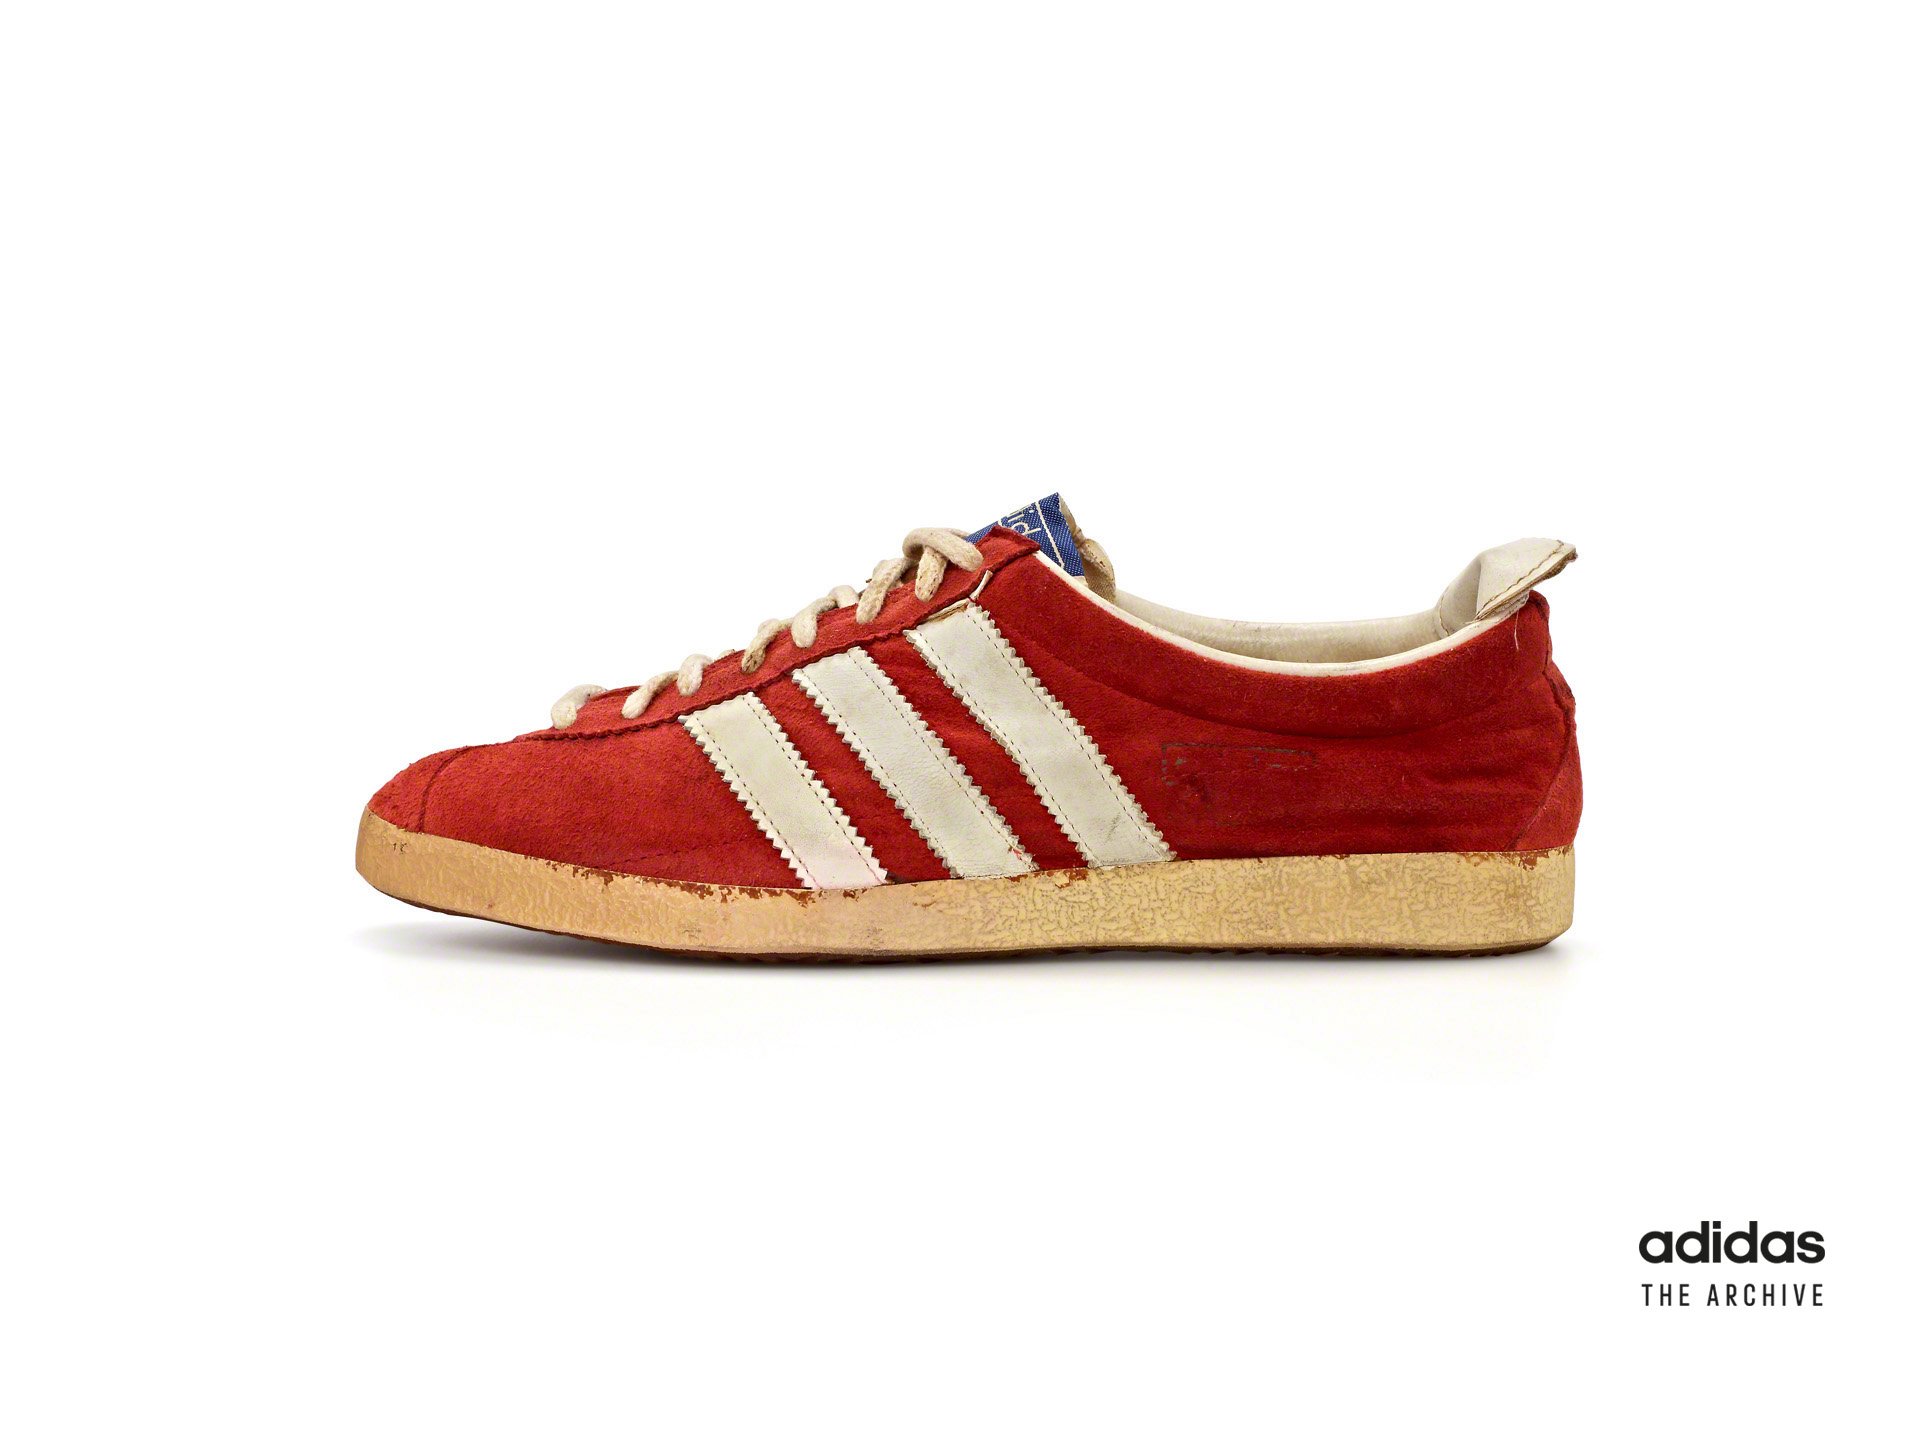 adidas on Twitter: "1970, Superstar​ ​ The '70s brought iconic music, culture, fashion &amp; prominent moments in sport history. It also brought the first edition of the timeless adidas which went